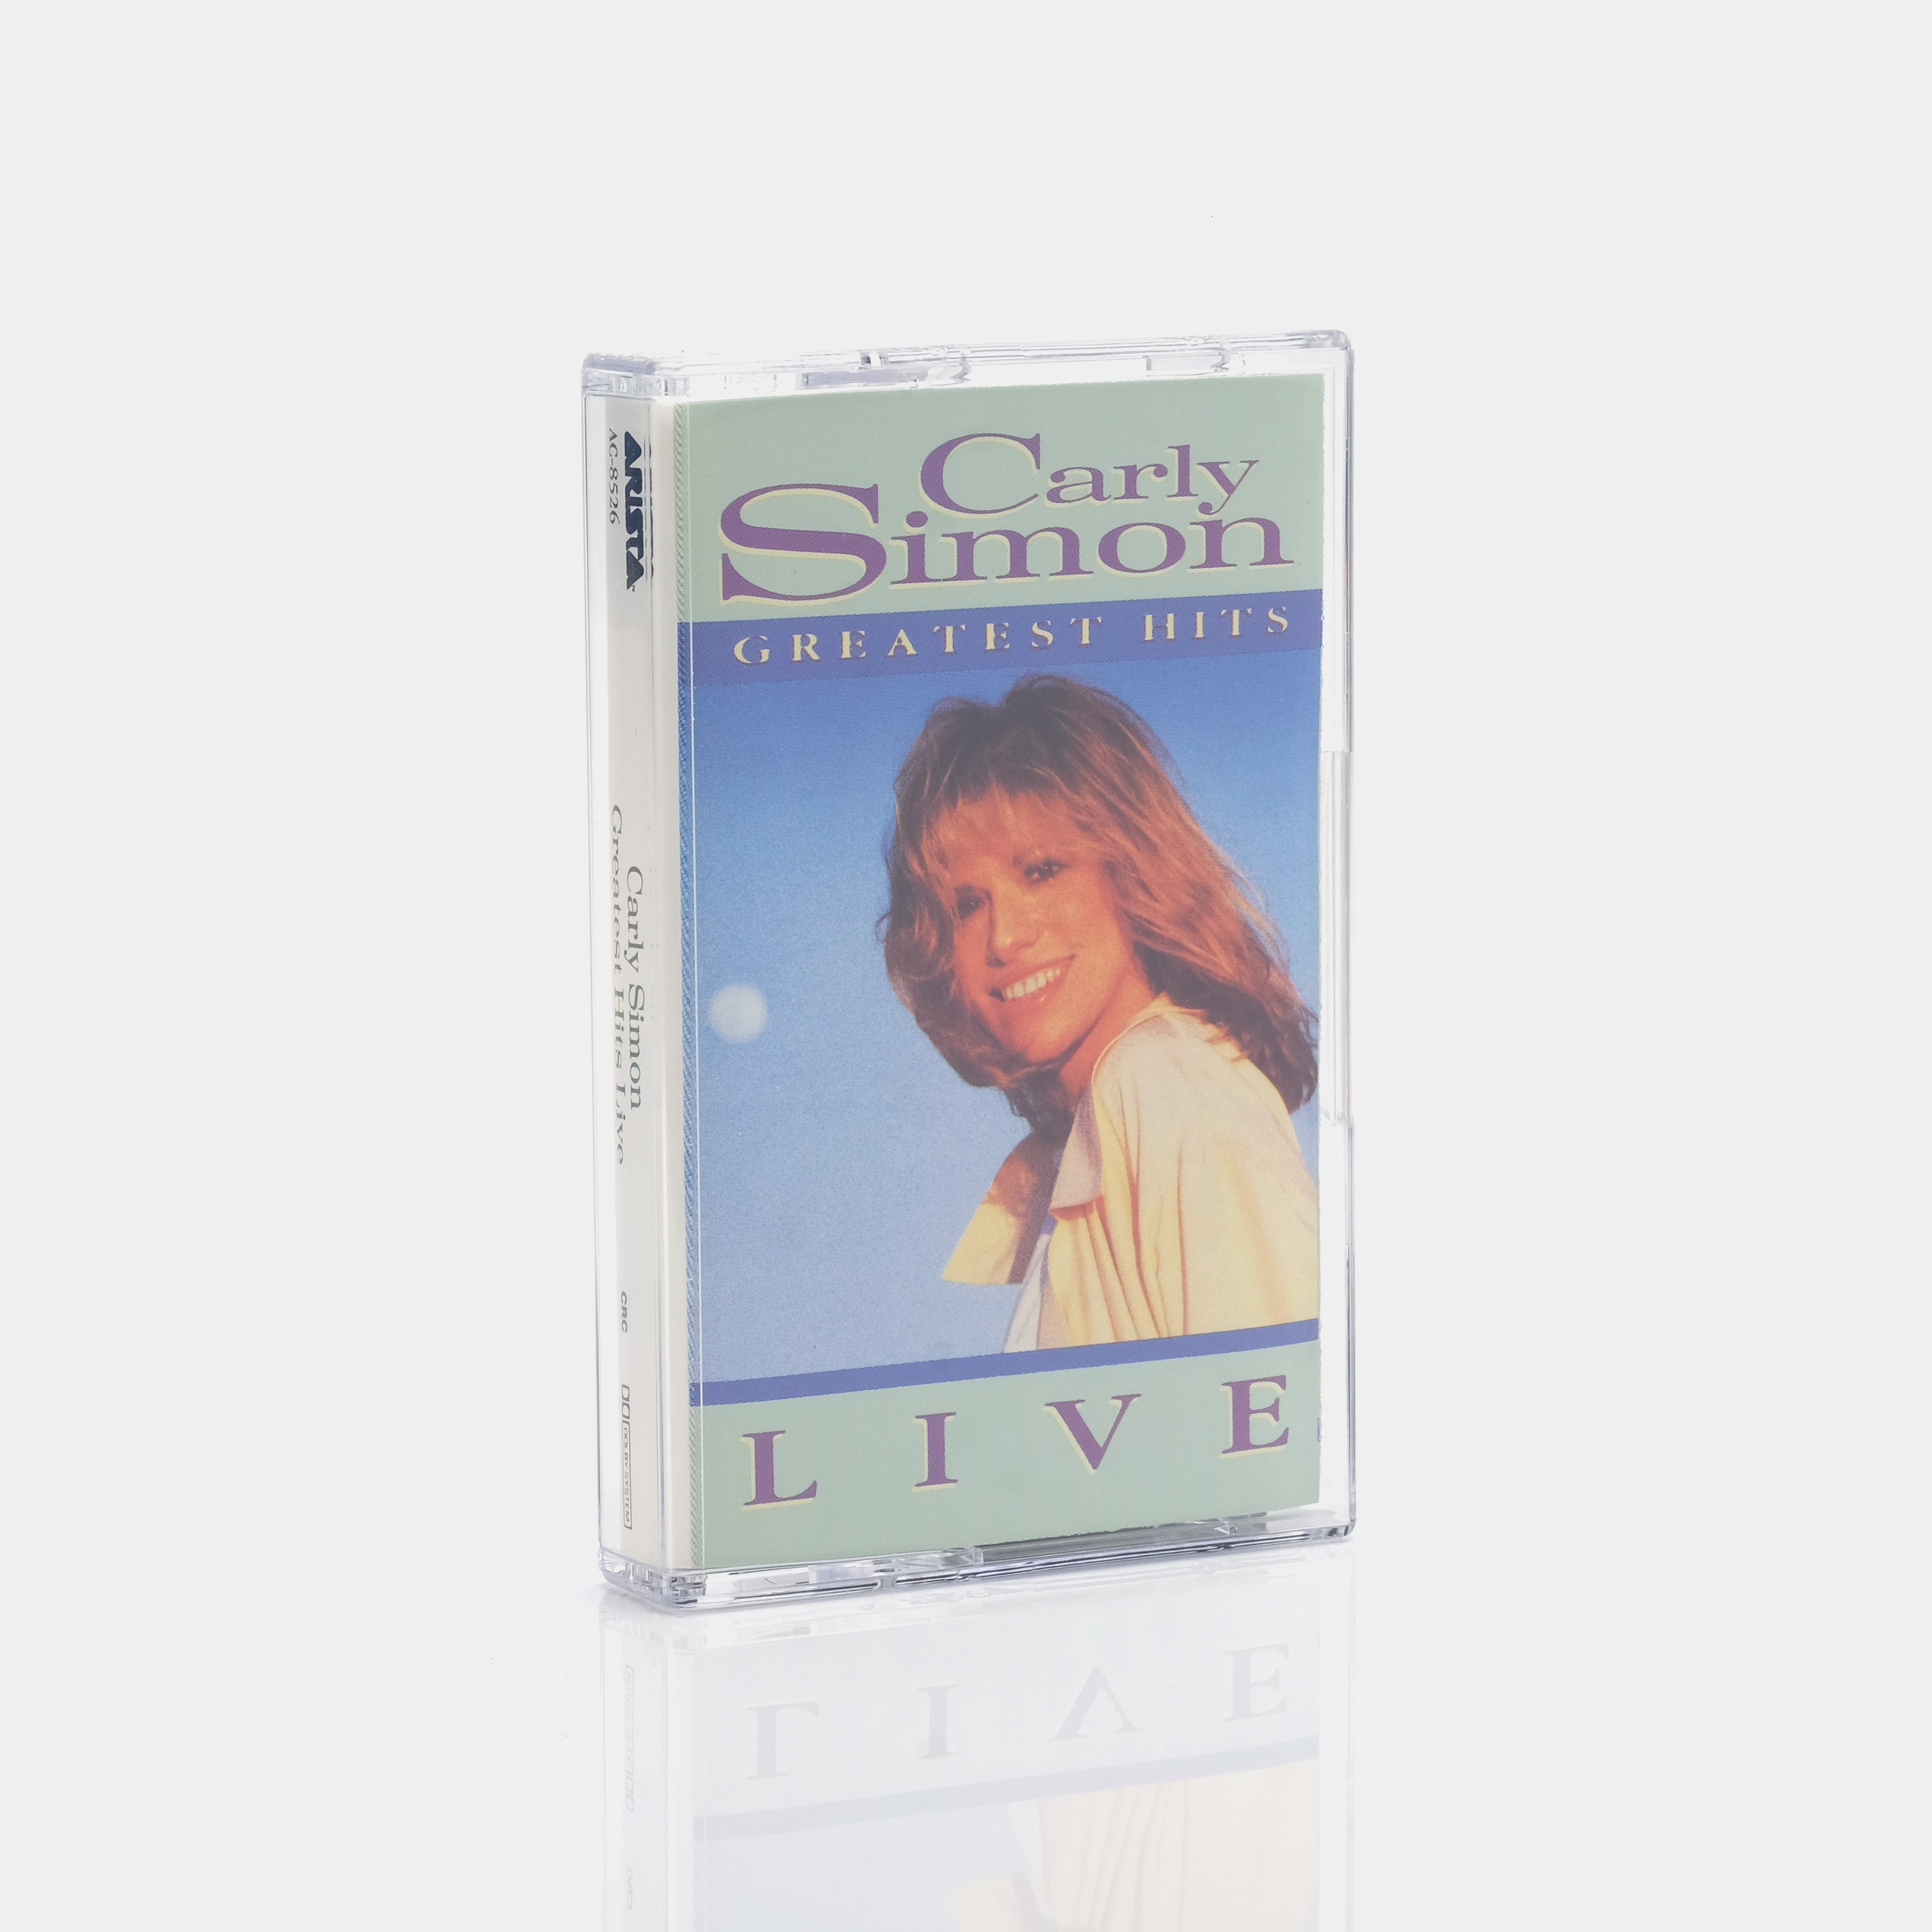 Carly Simon - Greatest Hits Live Cassette Tape